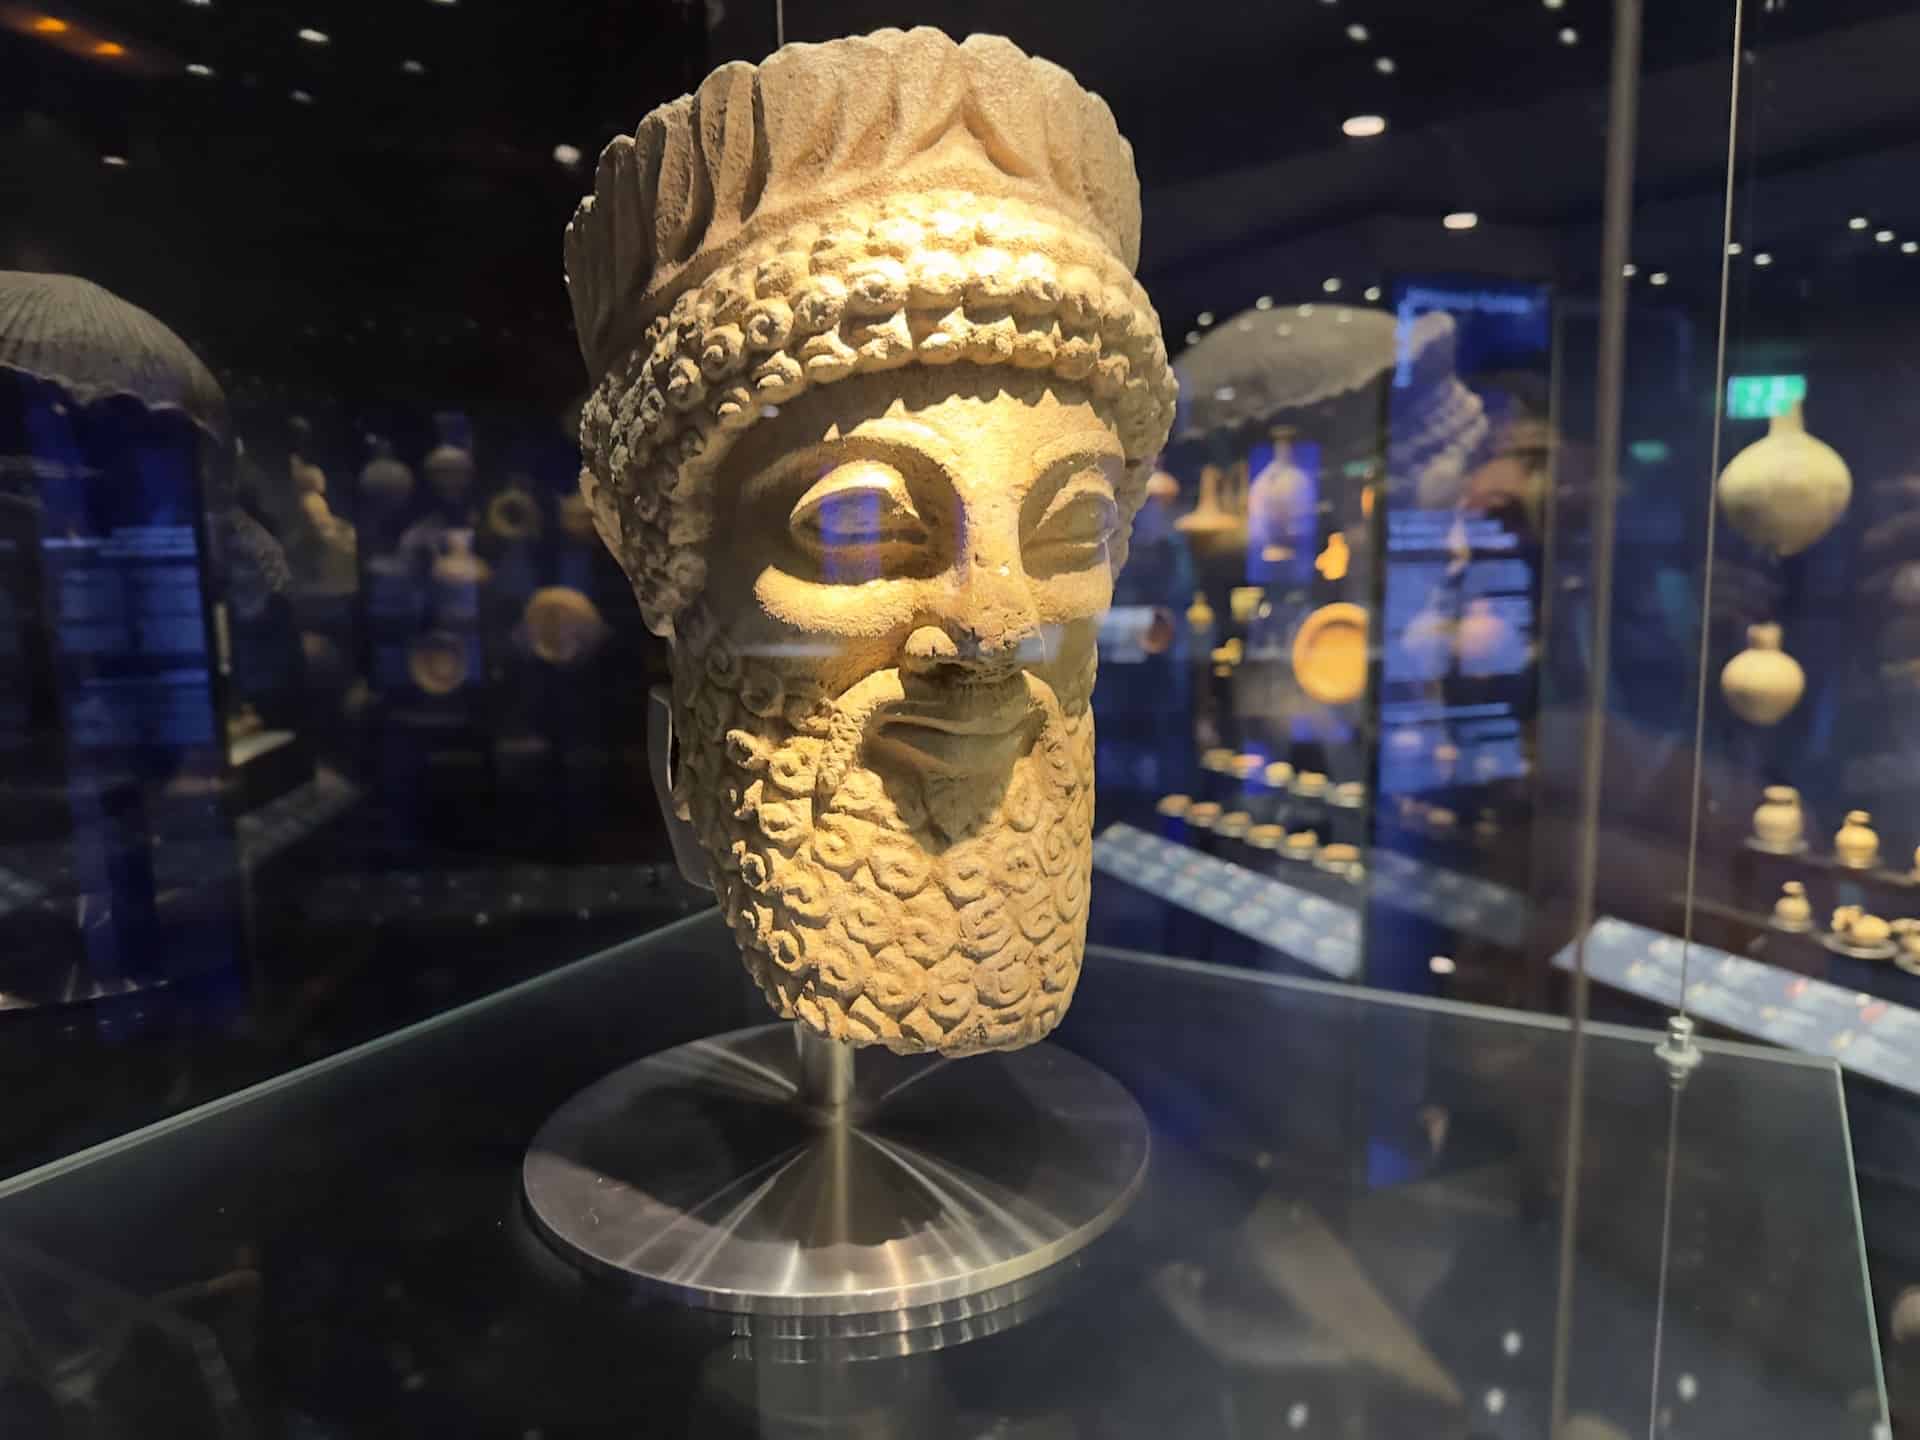 Bearded male head wearing a wreath of oak leaves; limestone; Cypro-Classical (480-400 BC) in Cypriot Culture at the Museum of Cycladic Art in Athens, Greece